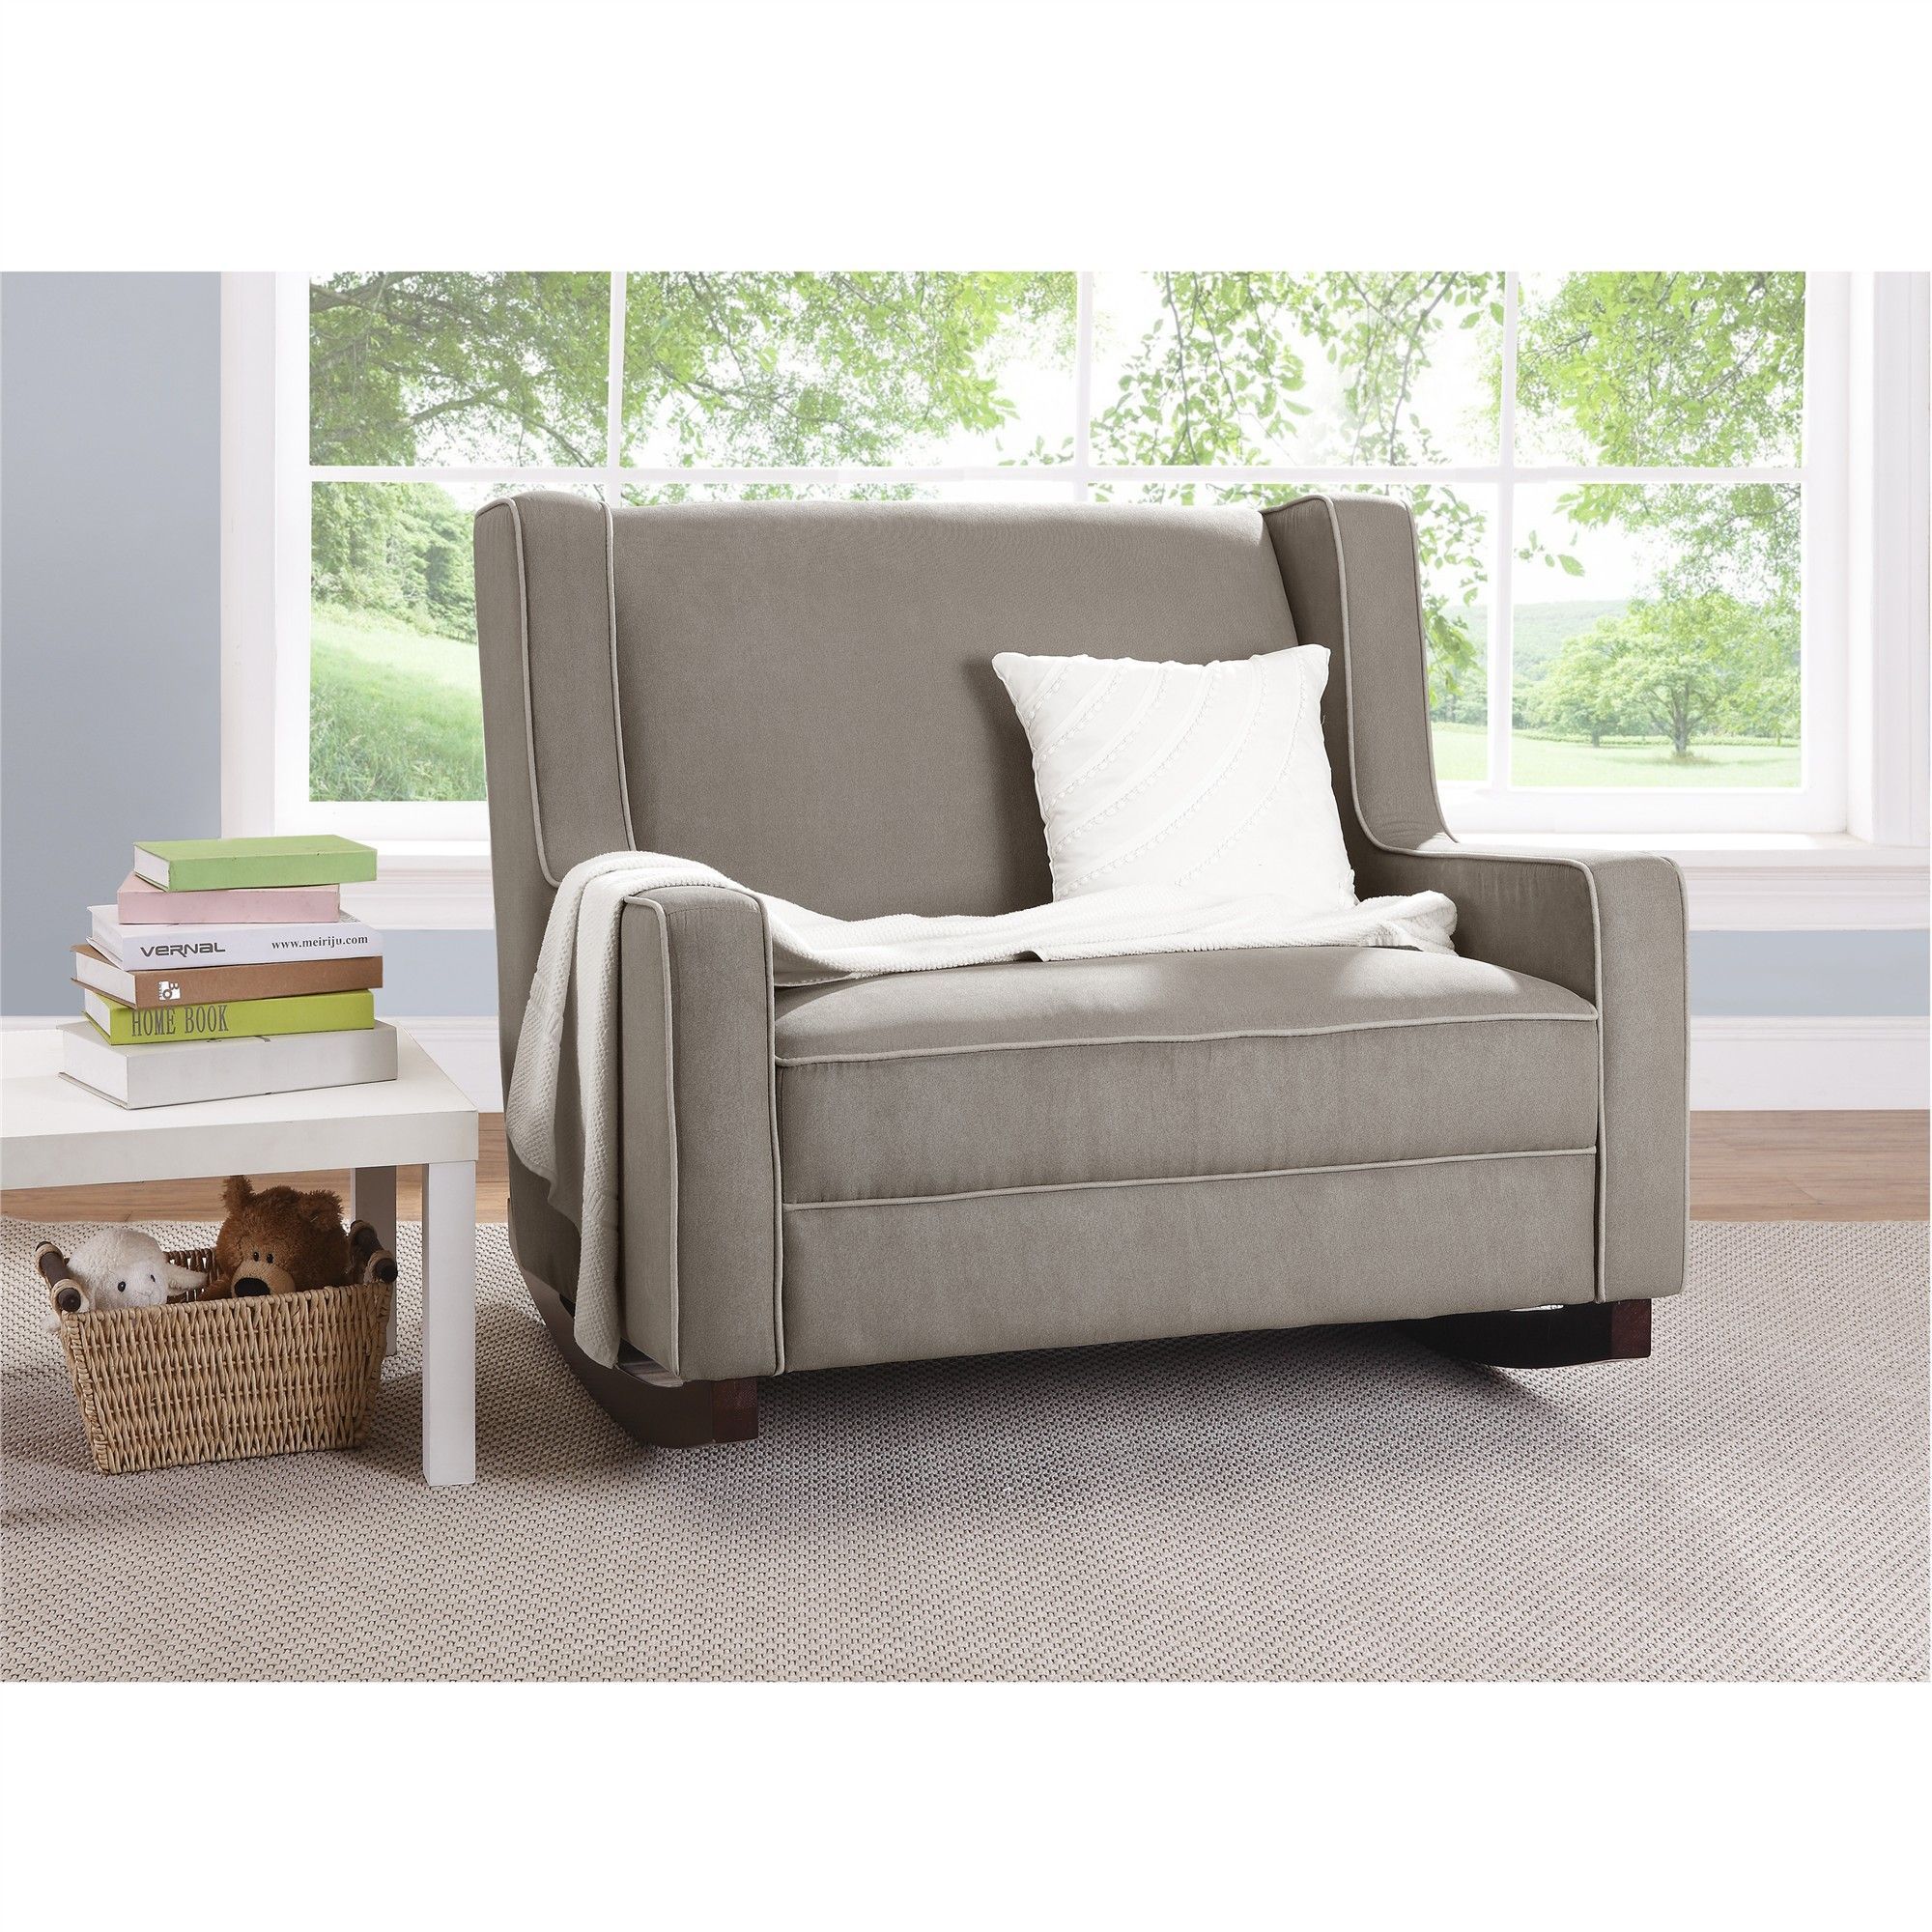 Chair: Captivating Double Glider Nursery With Comfortable For Double Glider Loveseats (View 21 of 25)